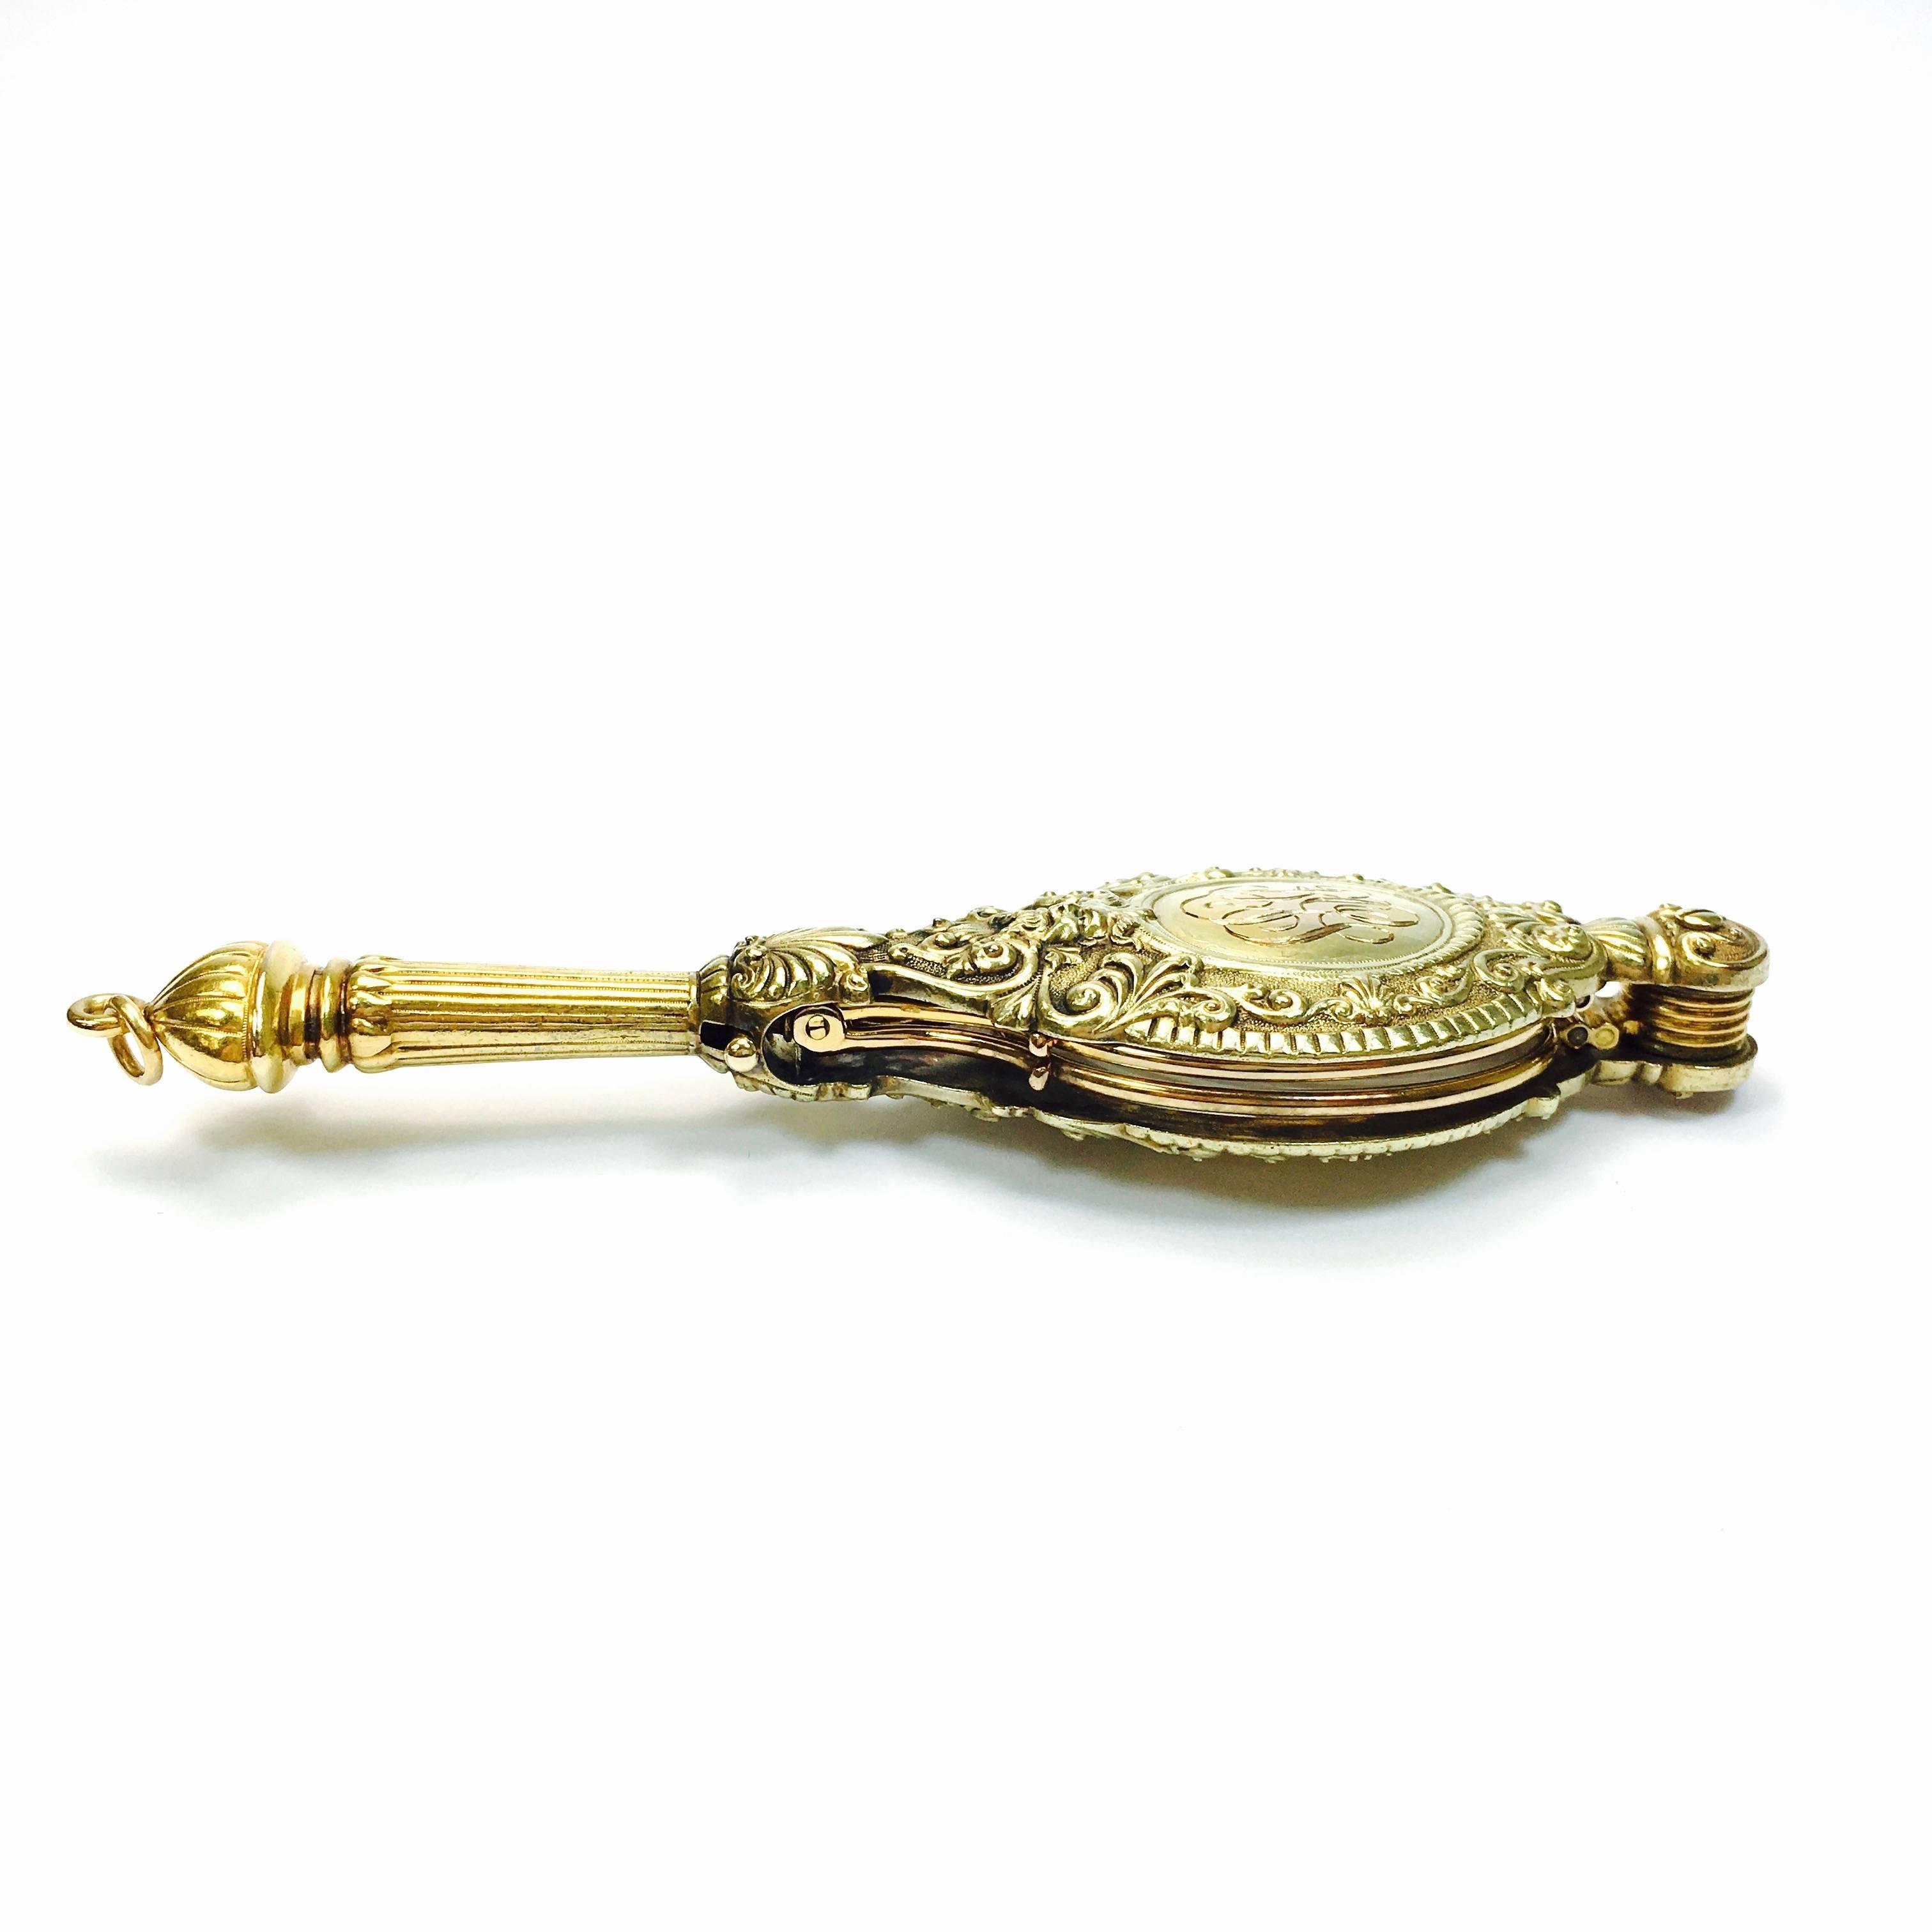 Beautiful turn of the century 14K lorgnette signed Krementz. Krementz is a well-documented American company from Newark, NJ that was known for their beautiful Art Nouveau jewelry. This yellow gold lorgnette measures 4 1/4